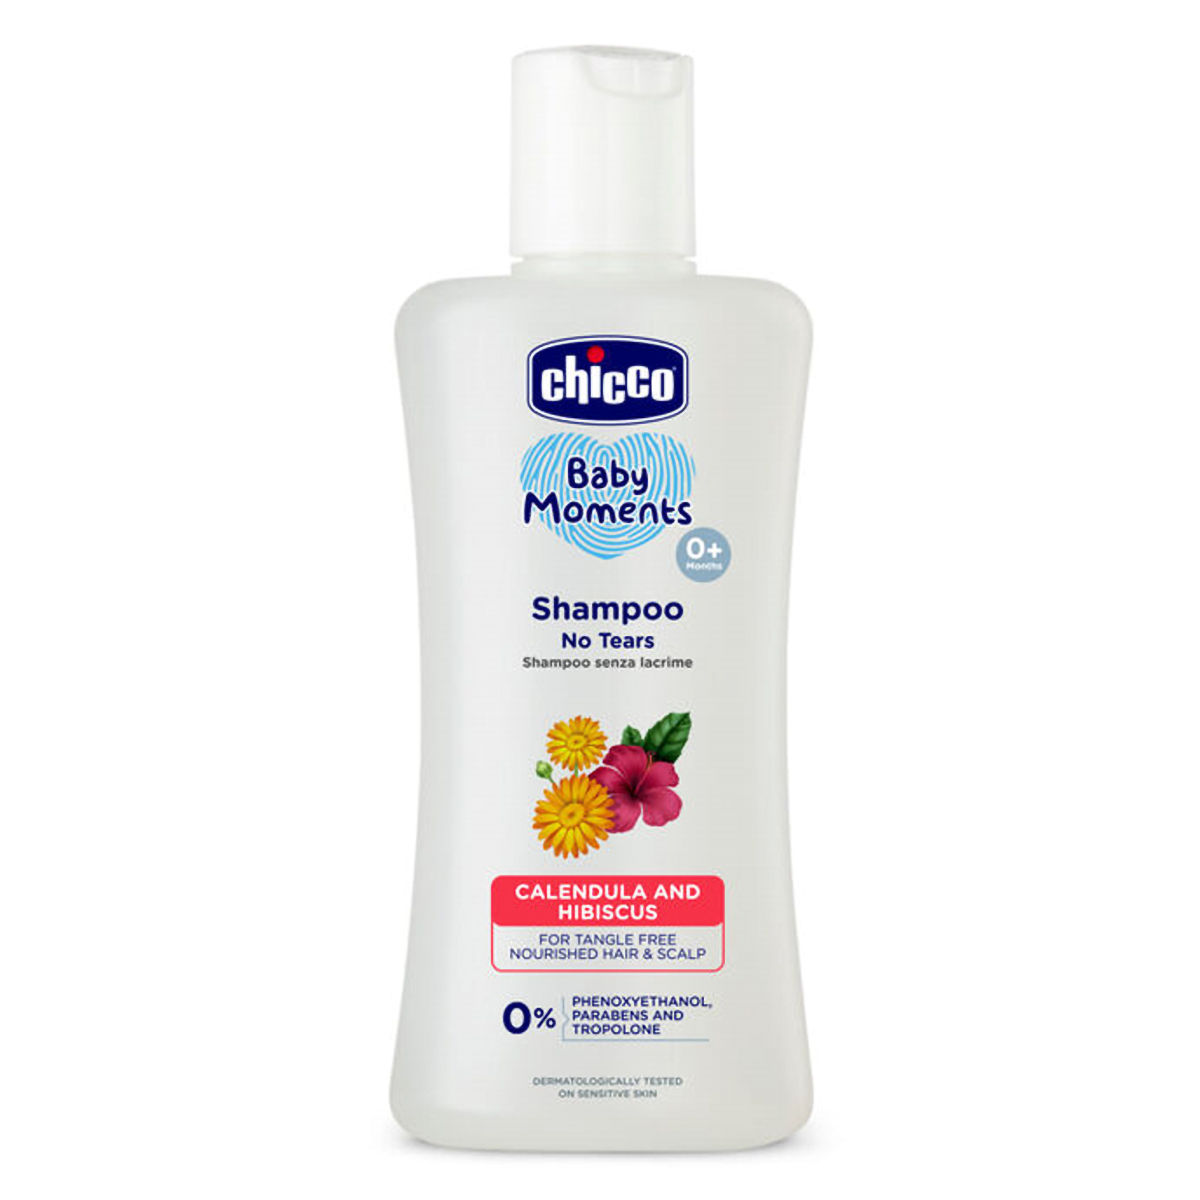 Chicco Baby Moments No Tears Shampoo, 200 ml, Pack of 1 